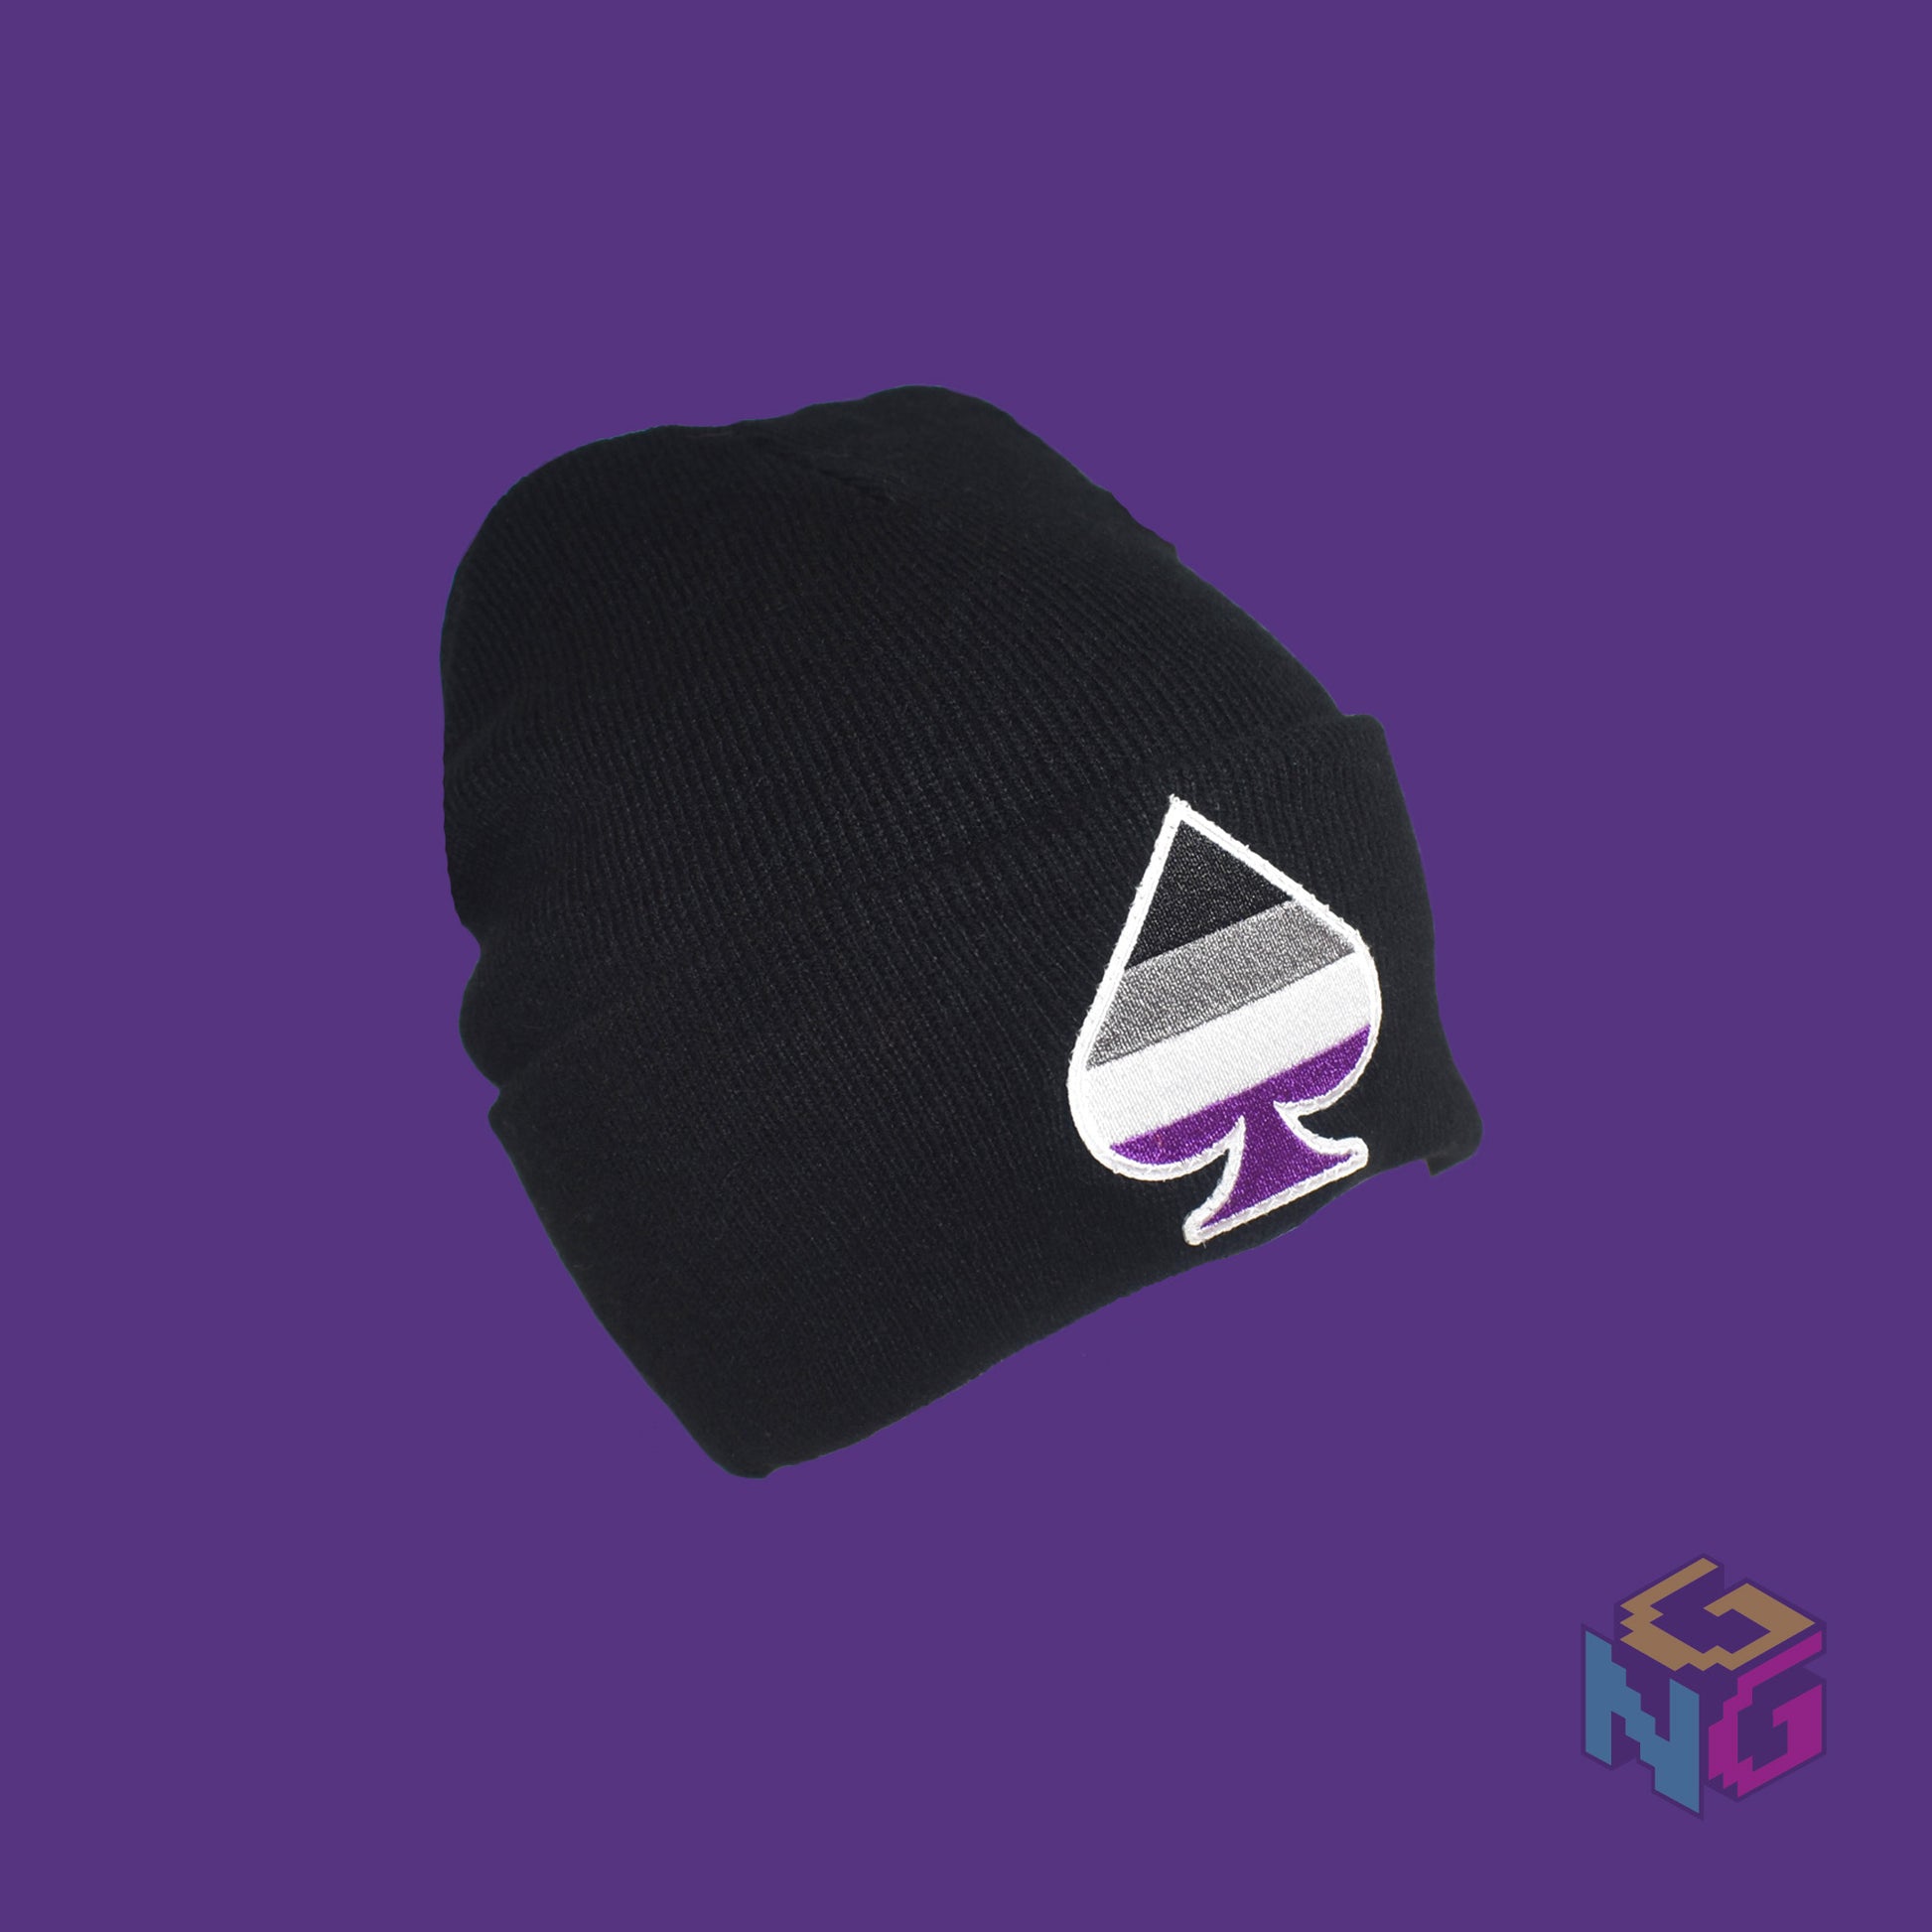 Black knit fabric beanie with the asexual ace of spades symbol in asexual black, white, grey, and purple on the front. It's in a 3/4 view on a purple background